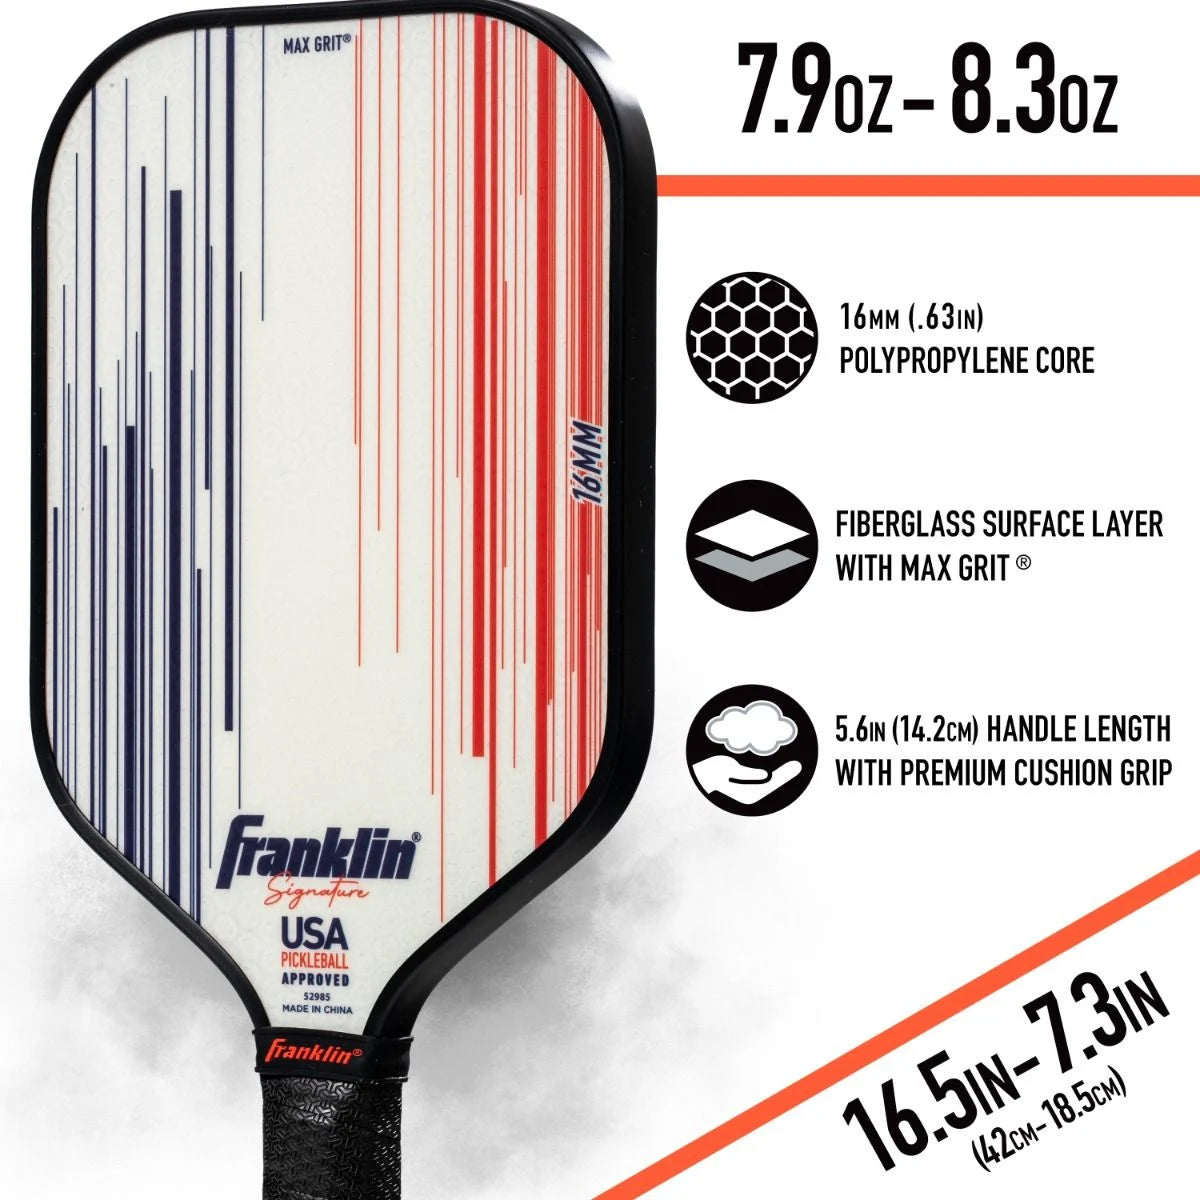 paddle style Pickleball paddles